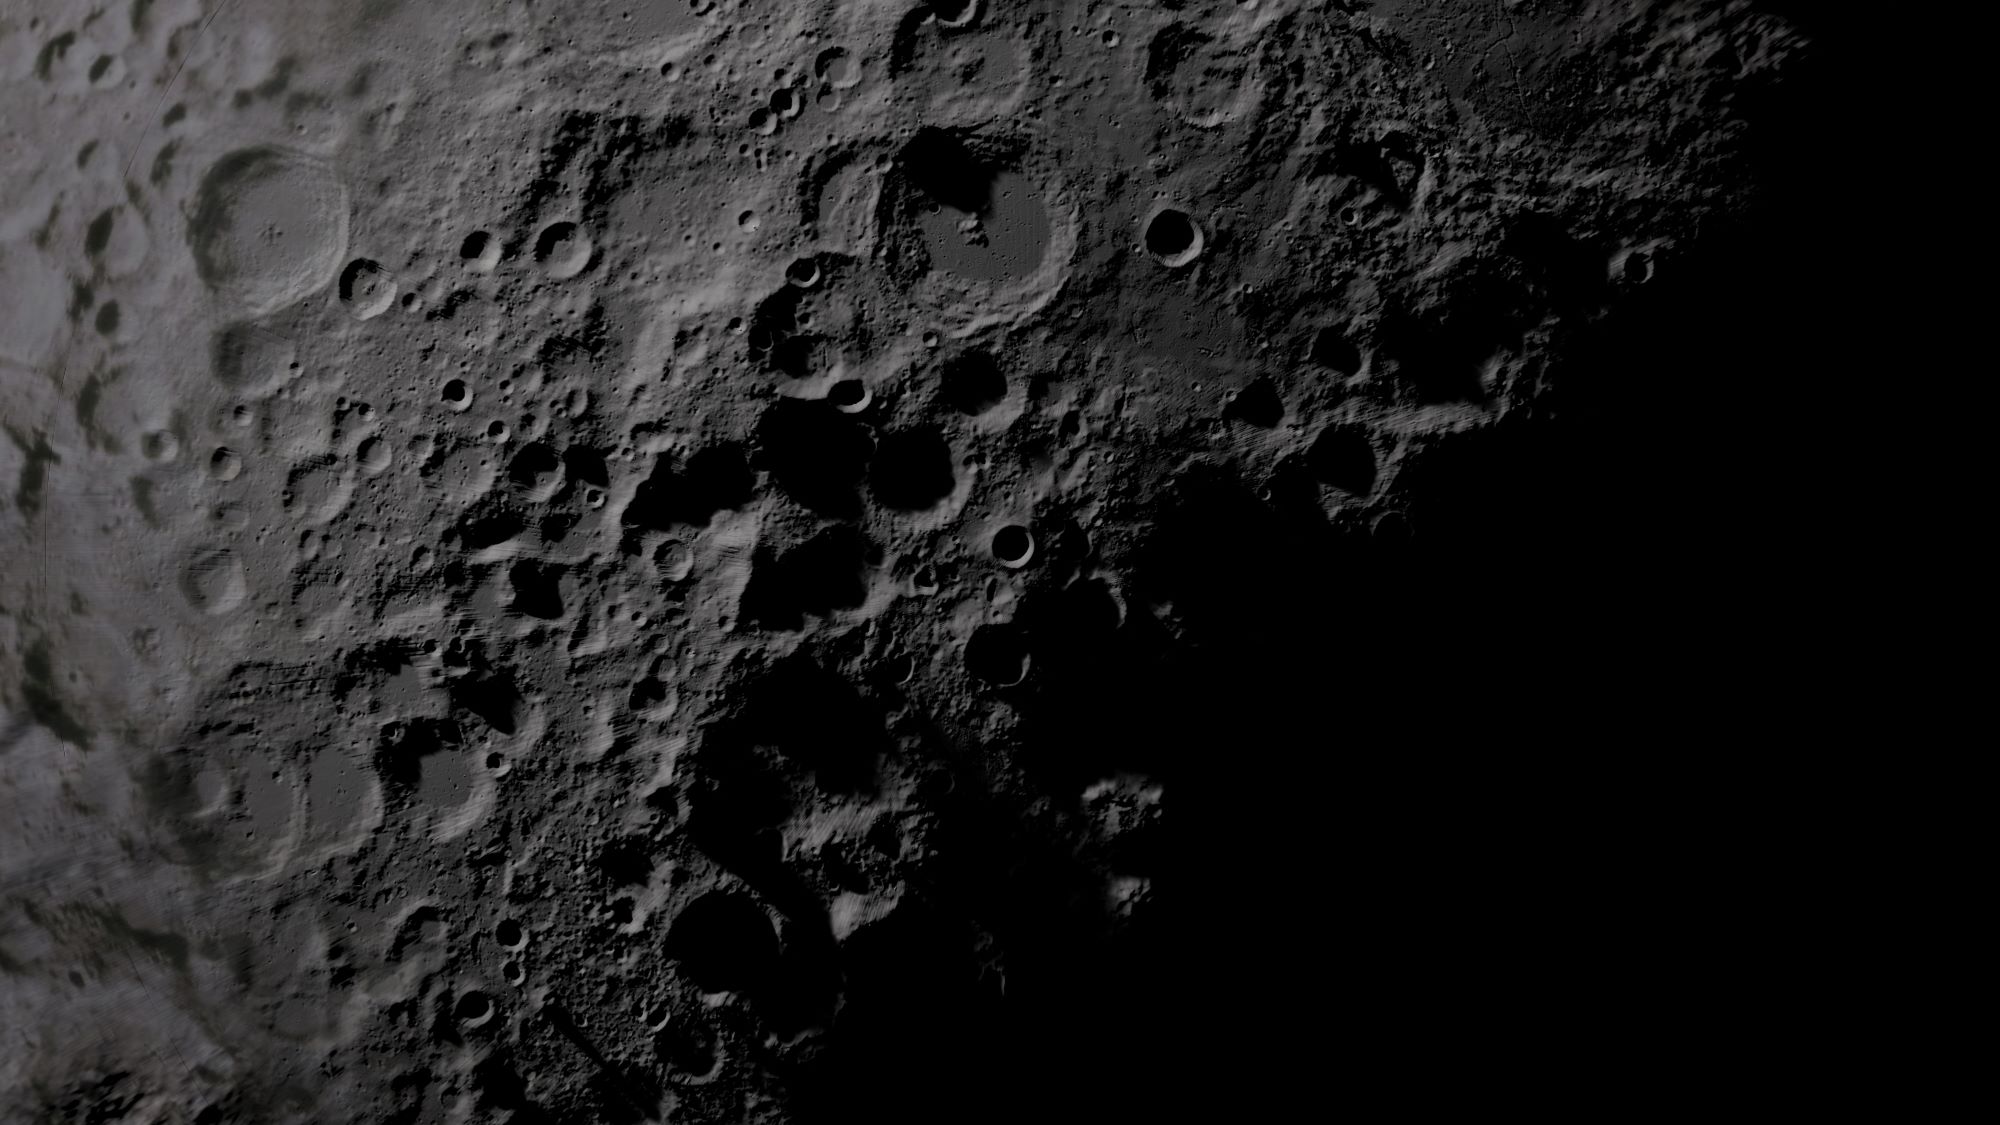 Pale craters on the moon's lunar surface, with dark shadows below.